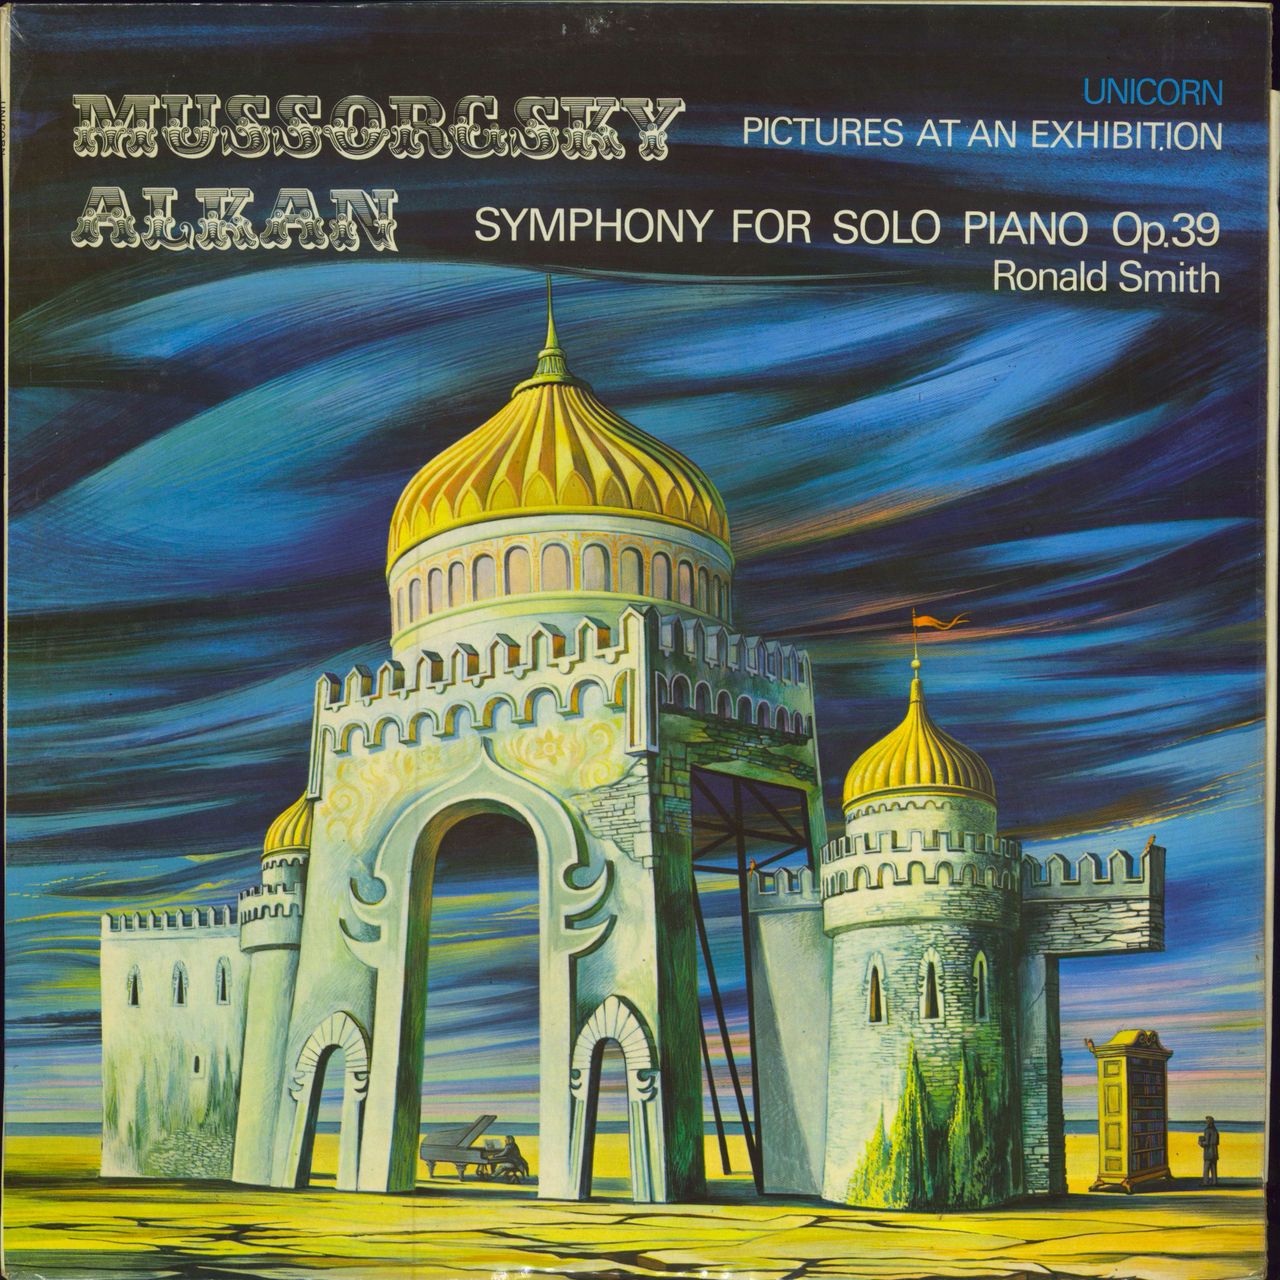 Ronald Smith Mussorgsky: Pictures At An Exhibition / Alkan: Symphony For Solo Piano Op. 39 UK vinyl LP album (LP record) UNS206